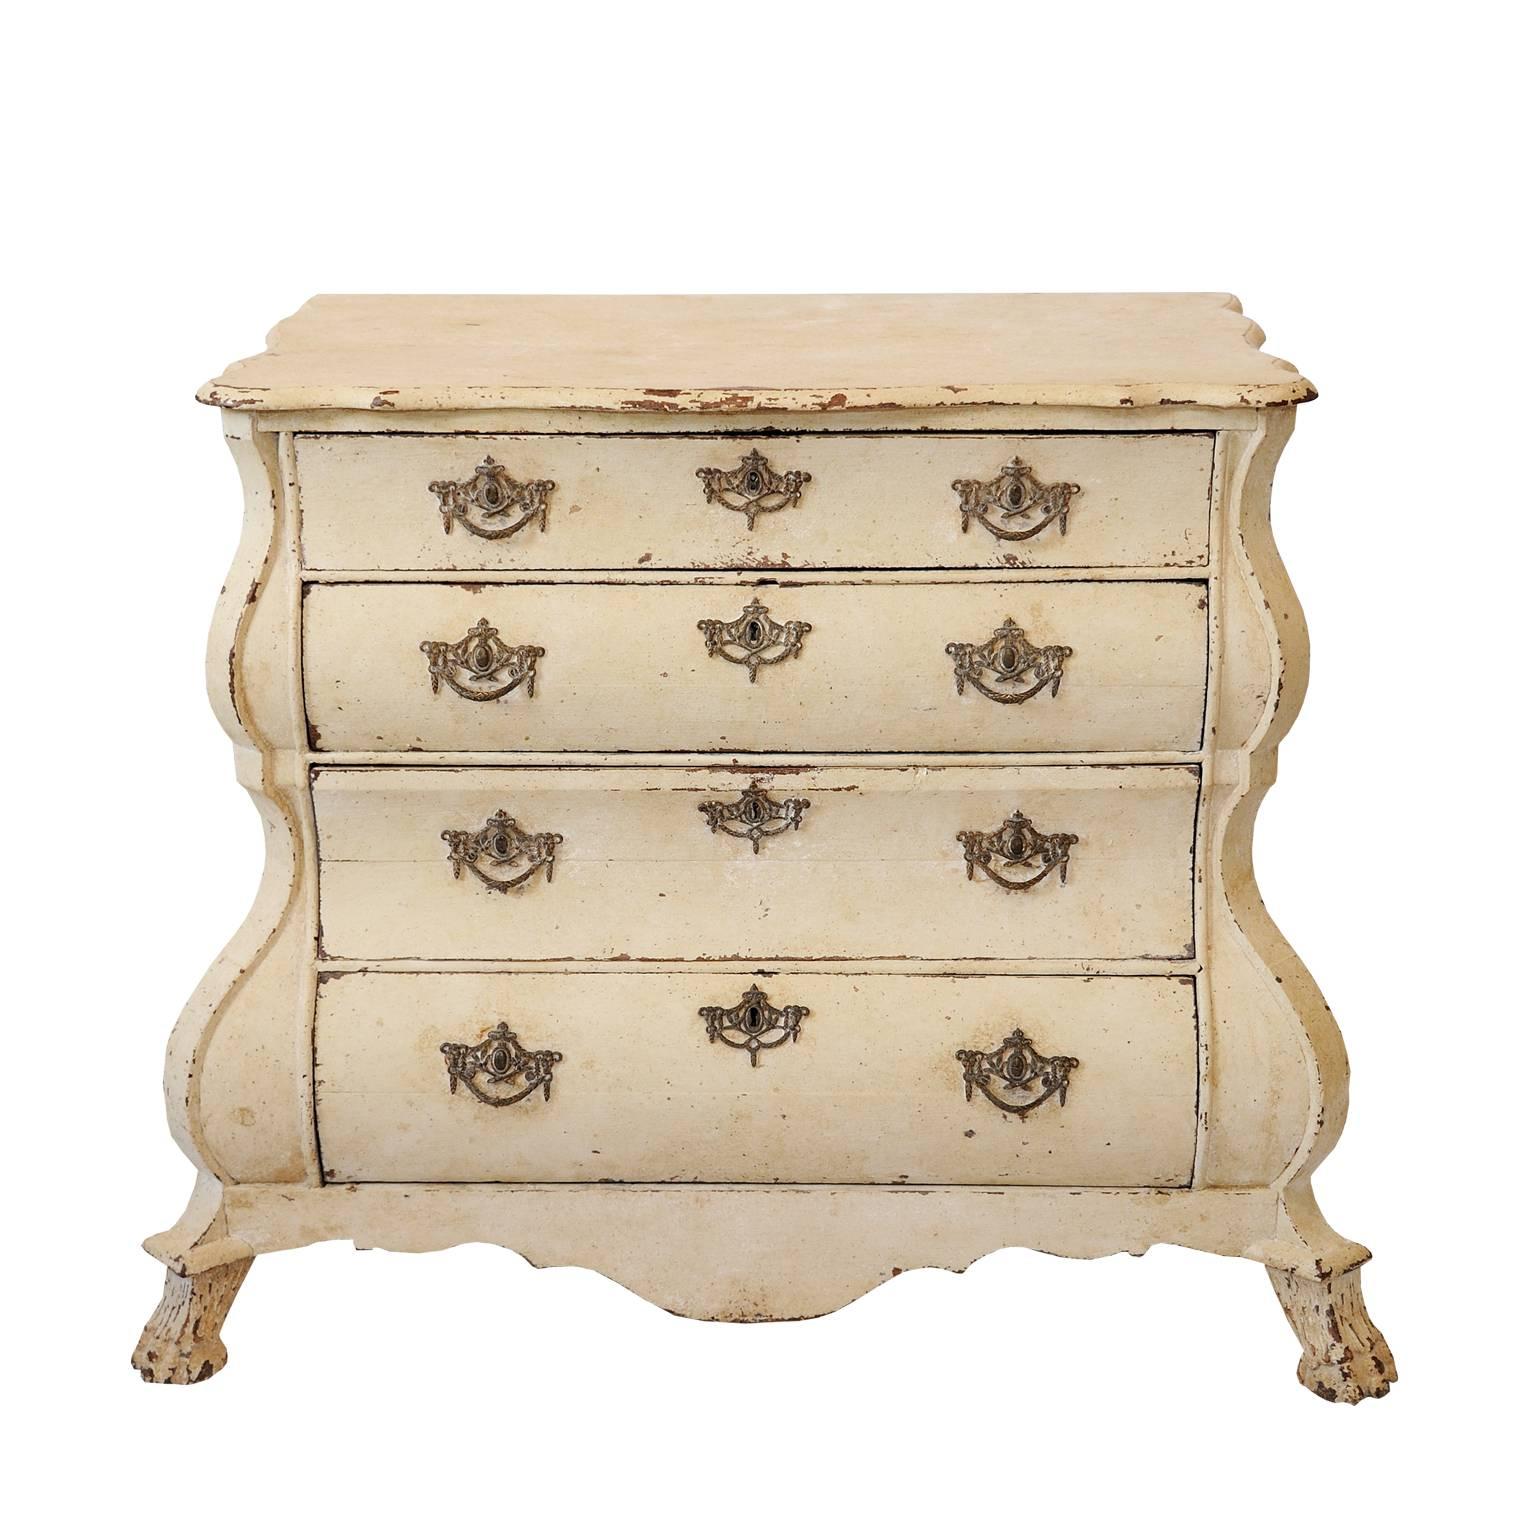 
This is a lovely Dutch, mid-18th century, small painted four-drawer baroque bombe shaped commode chest of drawers. Decorated on an oak carcass with original brass handles and escutcheons, also with original locks and Lions paw feet to the front.